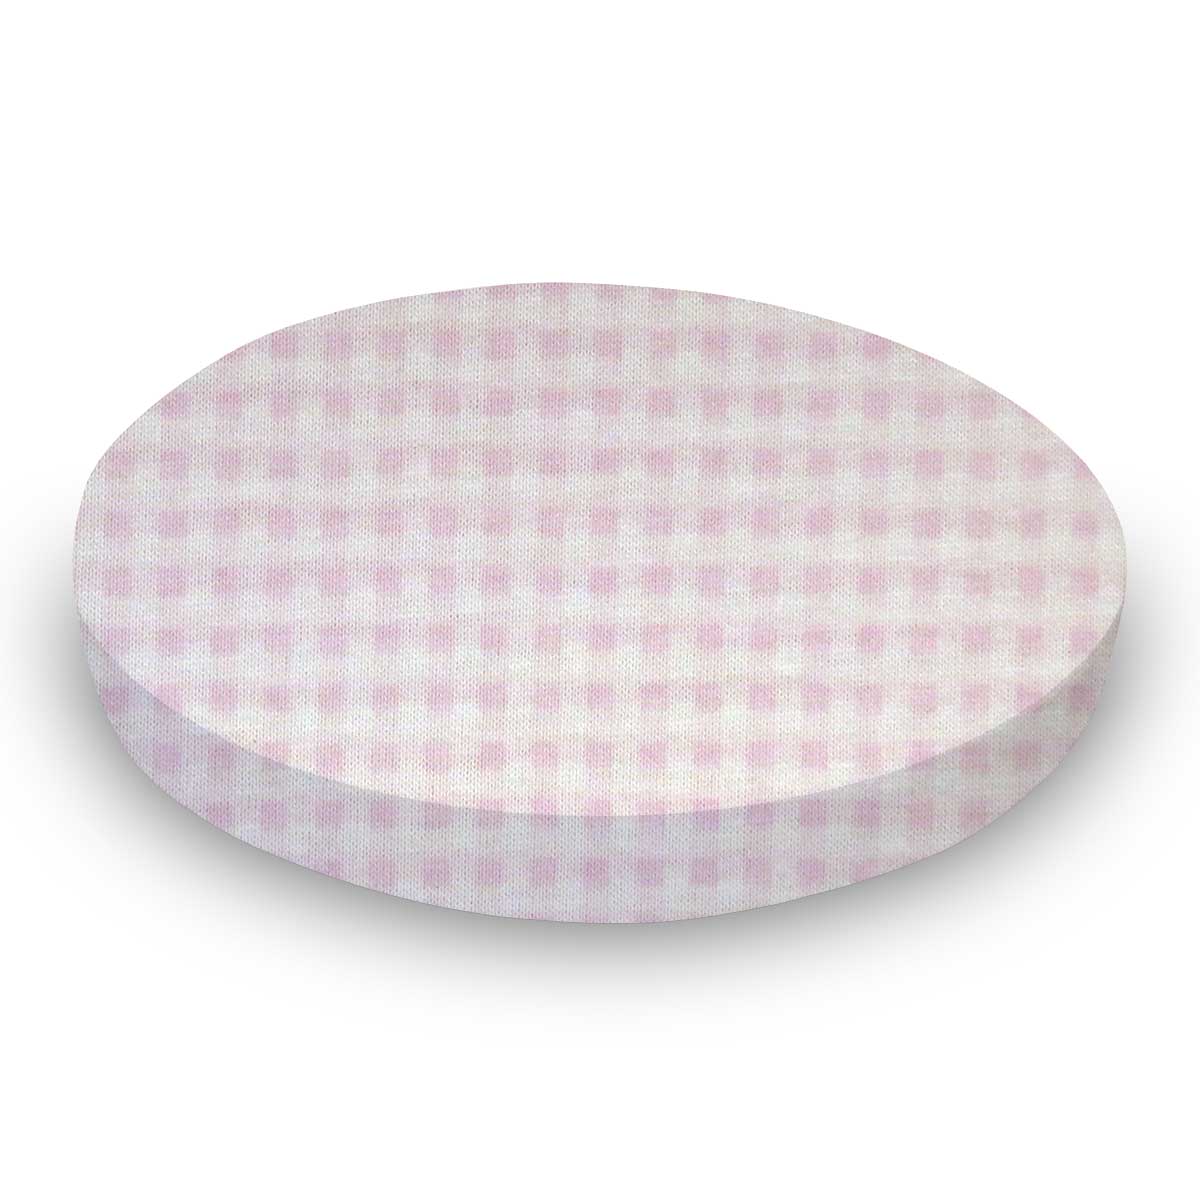 Oval (Stokke Mini) - Pink Gingham Jersey Knit - Fitted  Oval